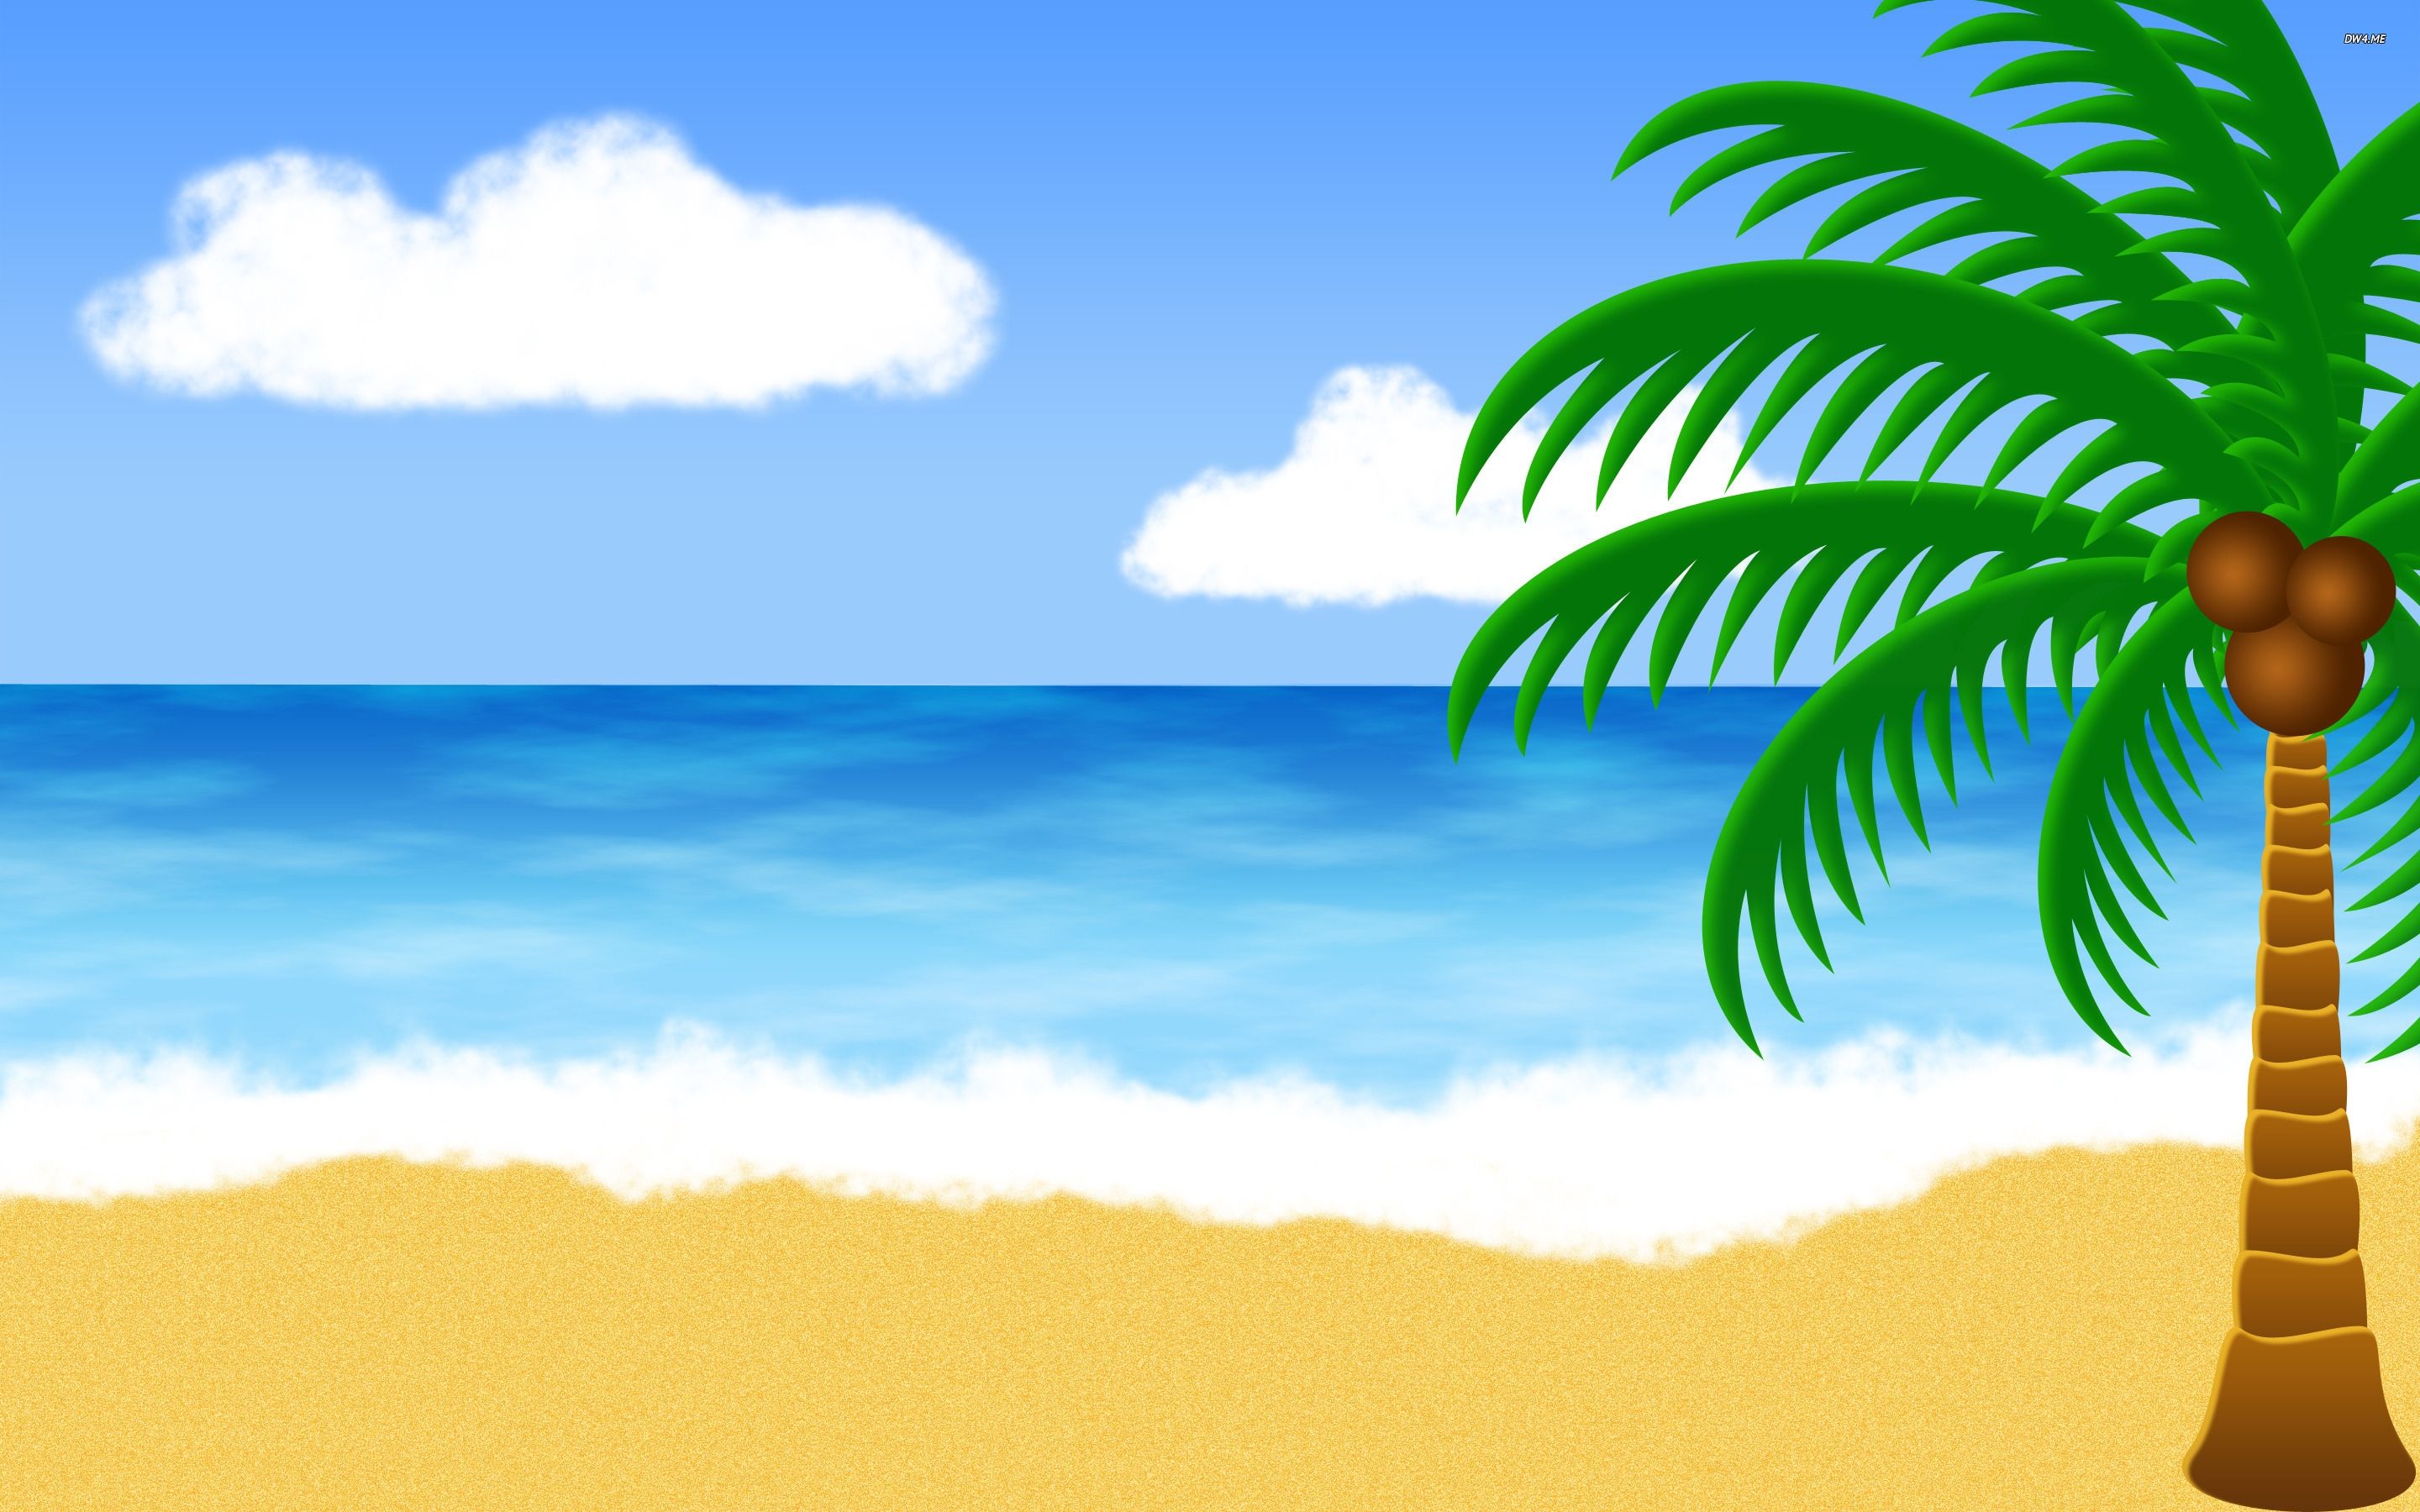 Animated clipart beach, Animated beach Transparent FREE for download on WebStockReview 2020